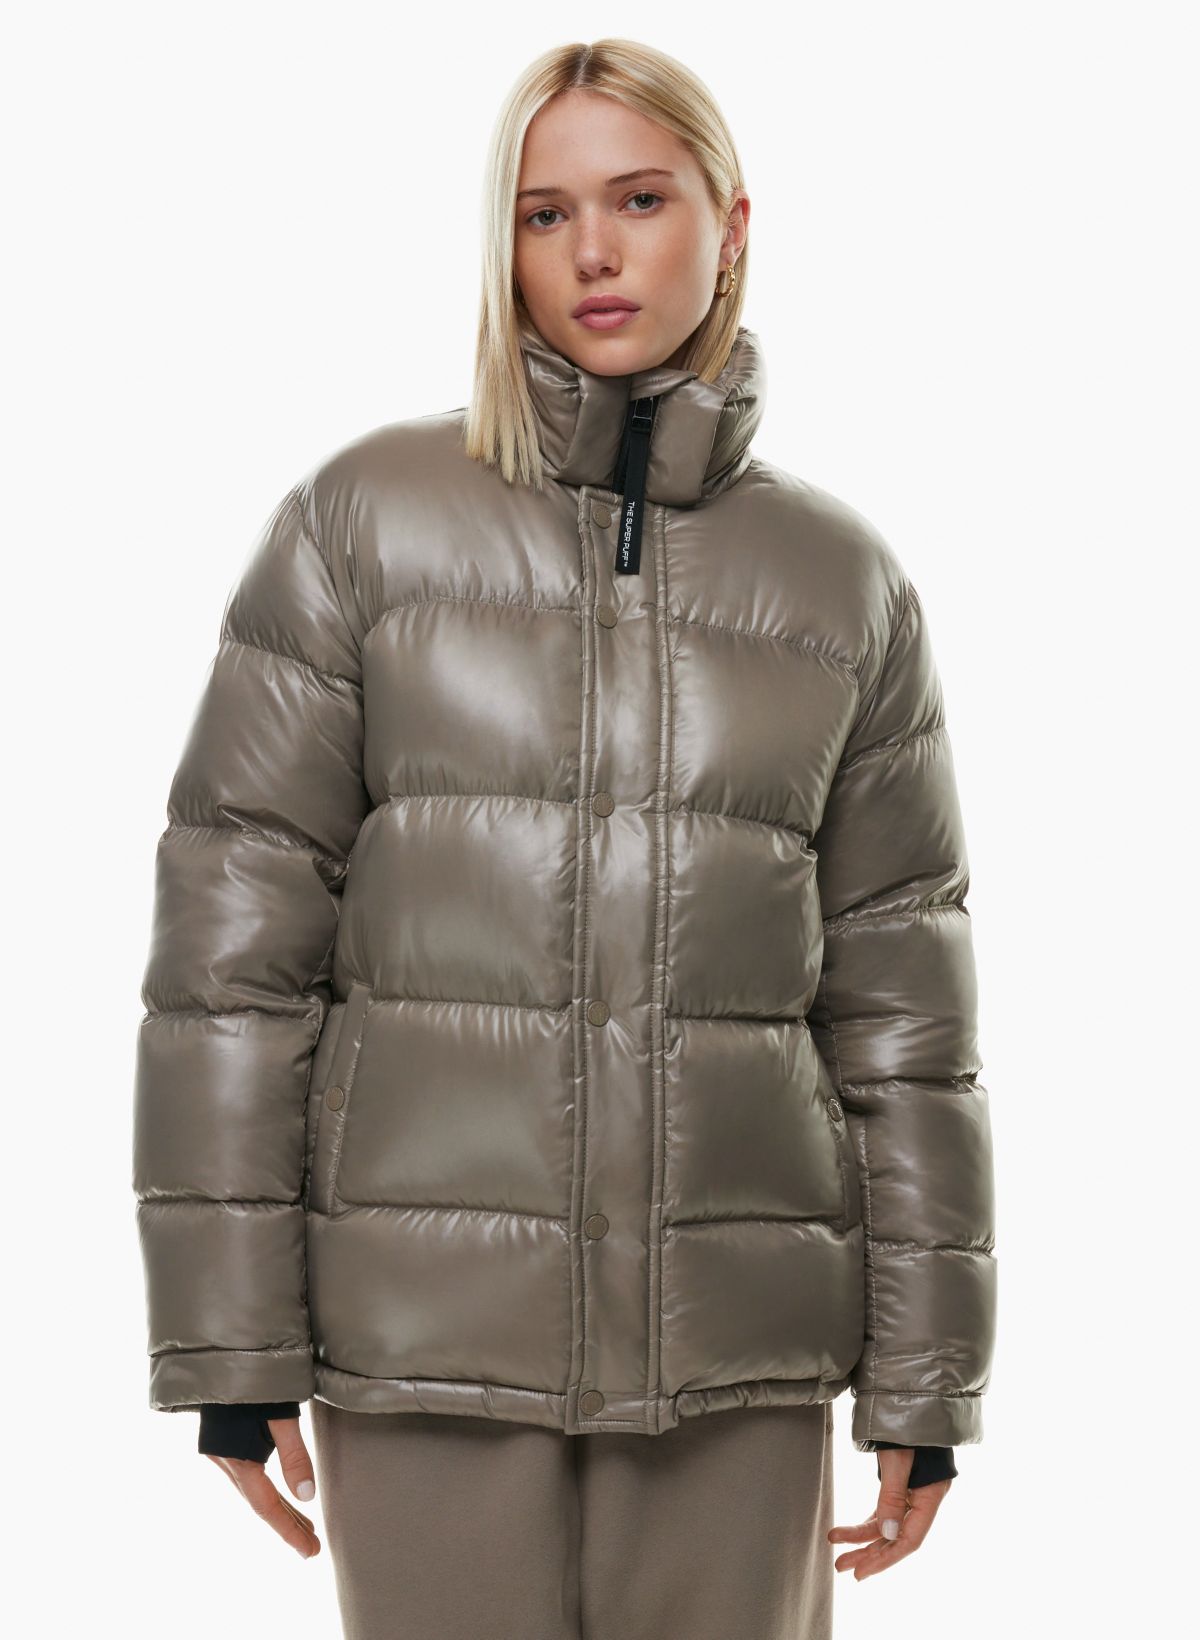 Lots of new Super Puff styles just added : r/Aritzia